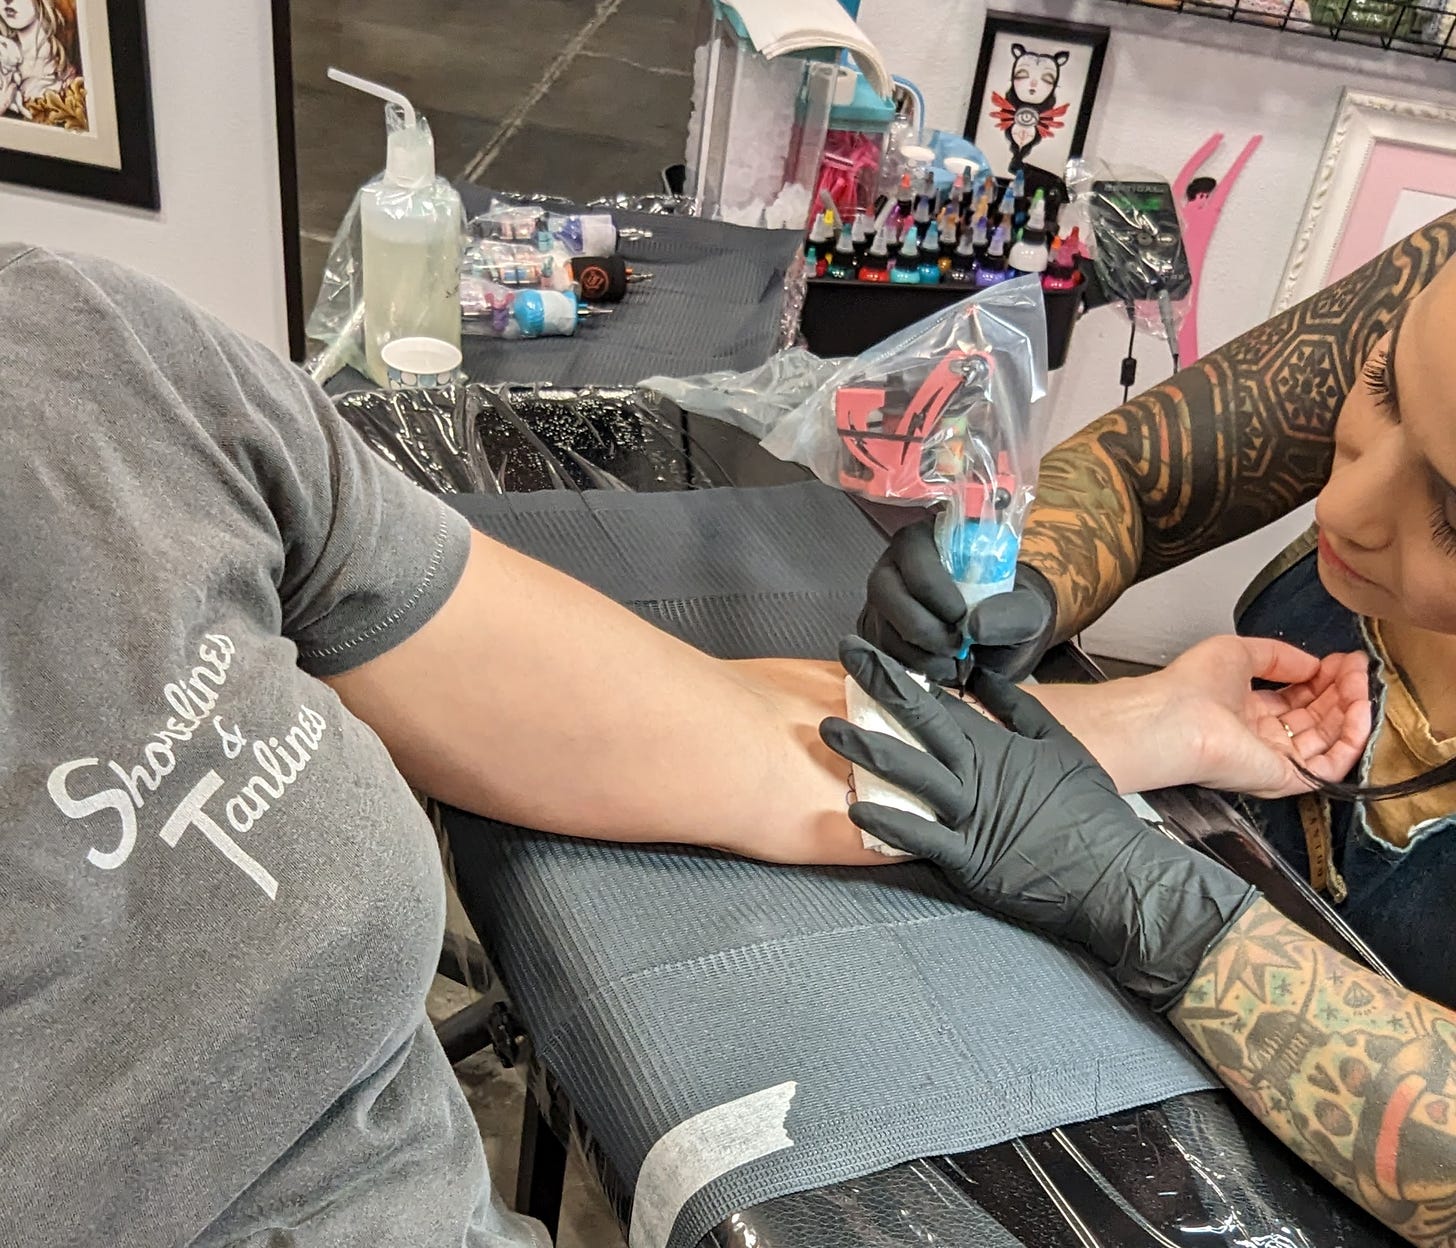 Joanna's arm being tattooed by Alex Strangler, a woman with tattooed arms and long, dark eyelashes